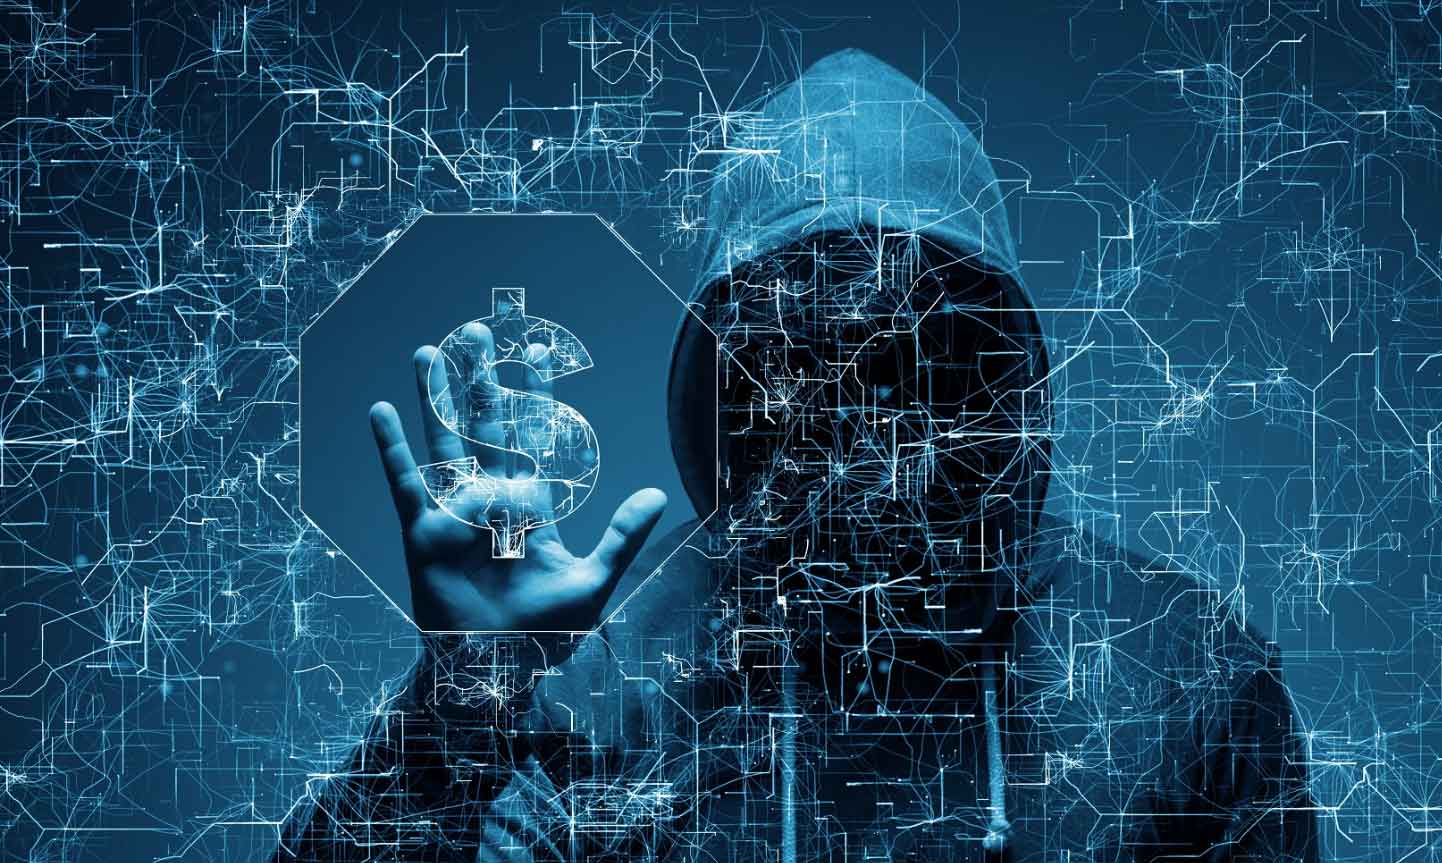 Cybercrime to Cost Germany 206 billion Euros in 2023, Survey Finds